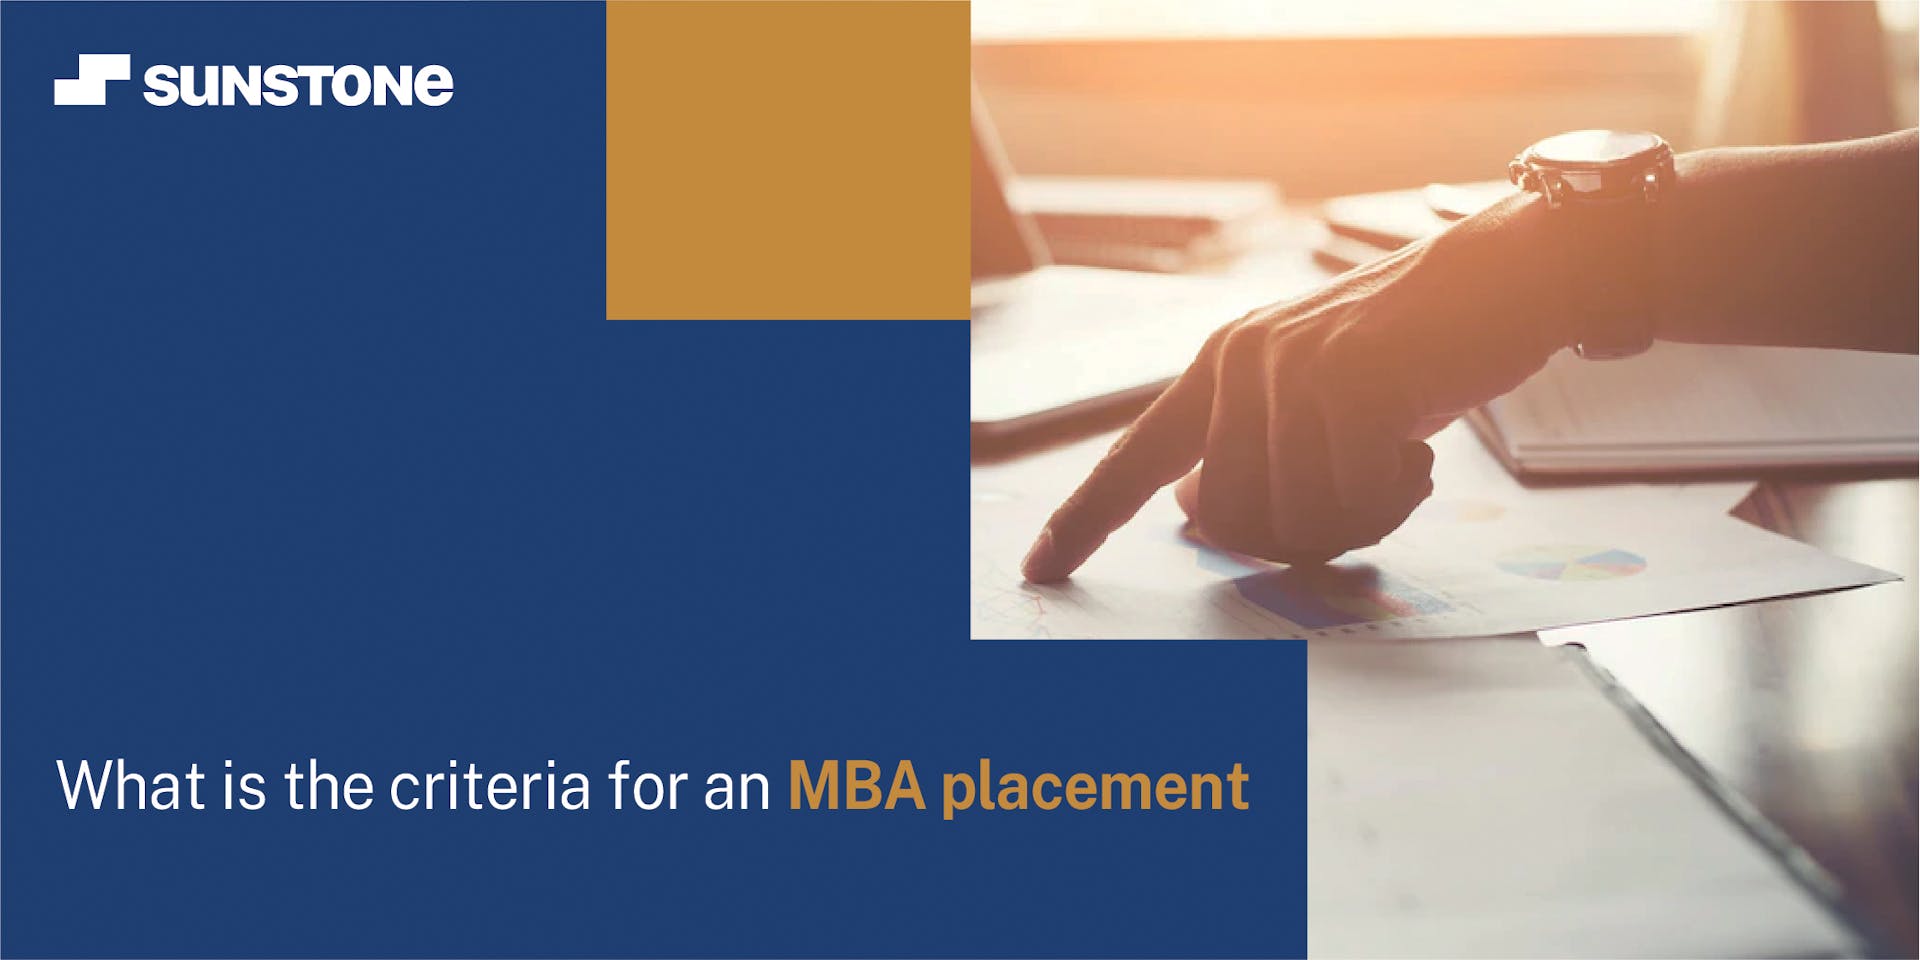 mba placement